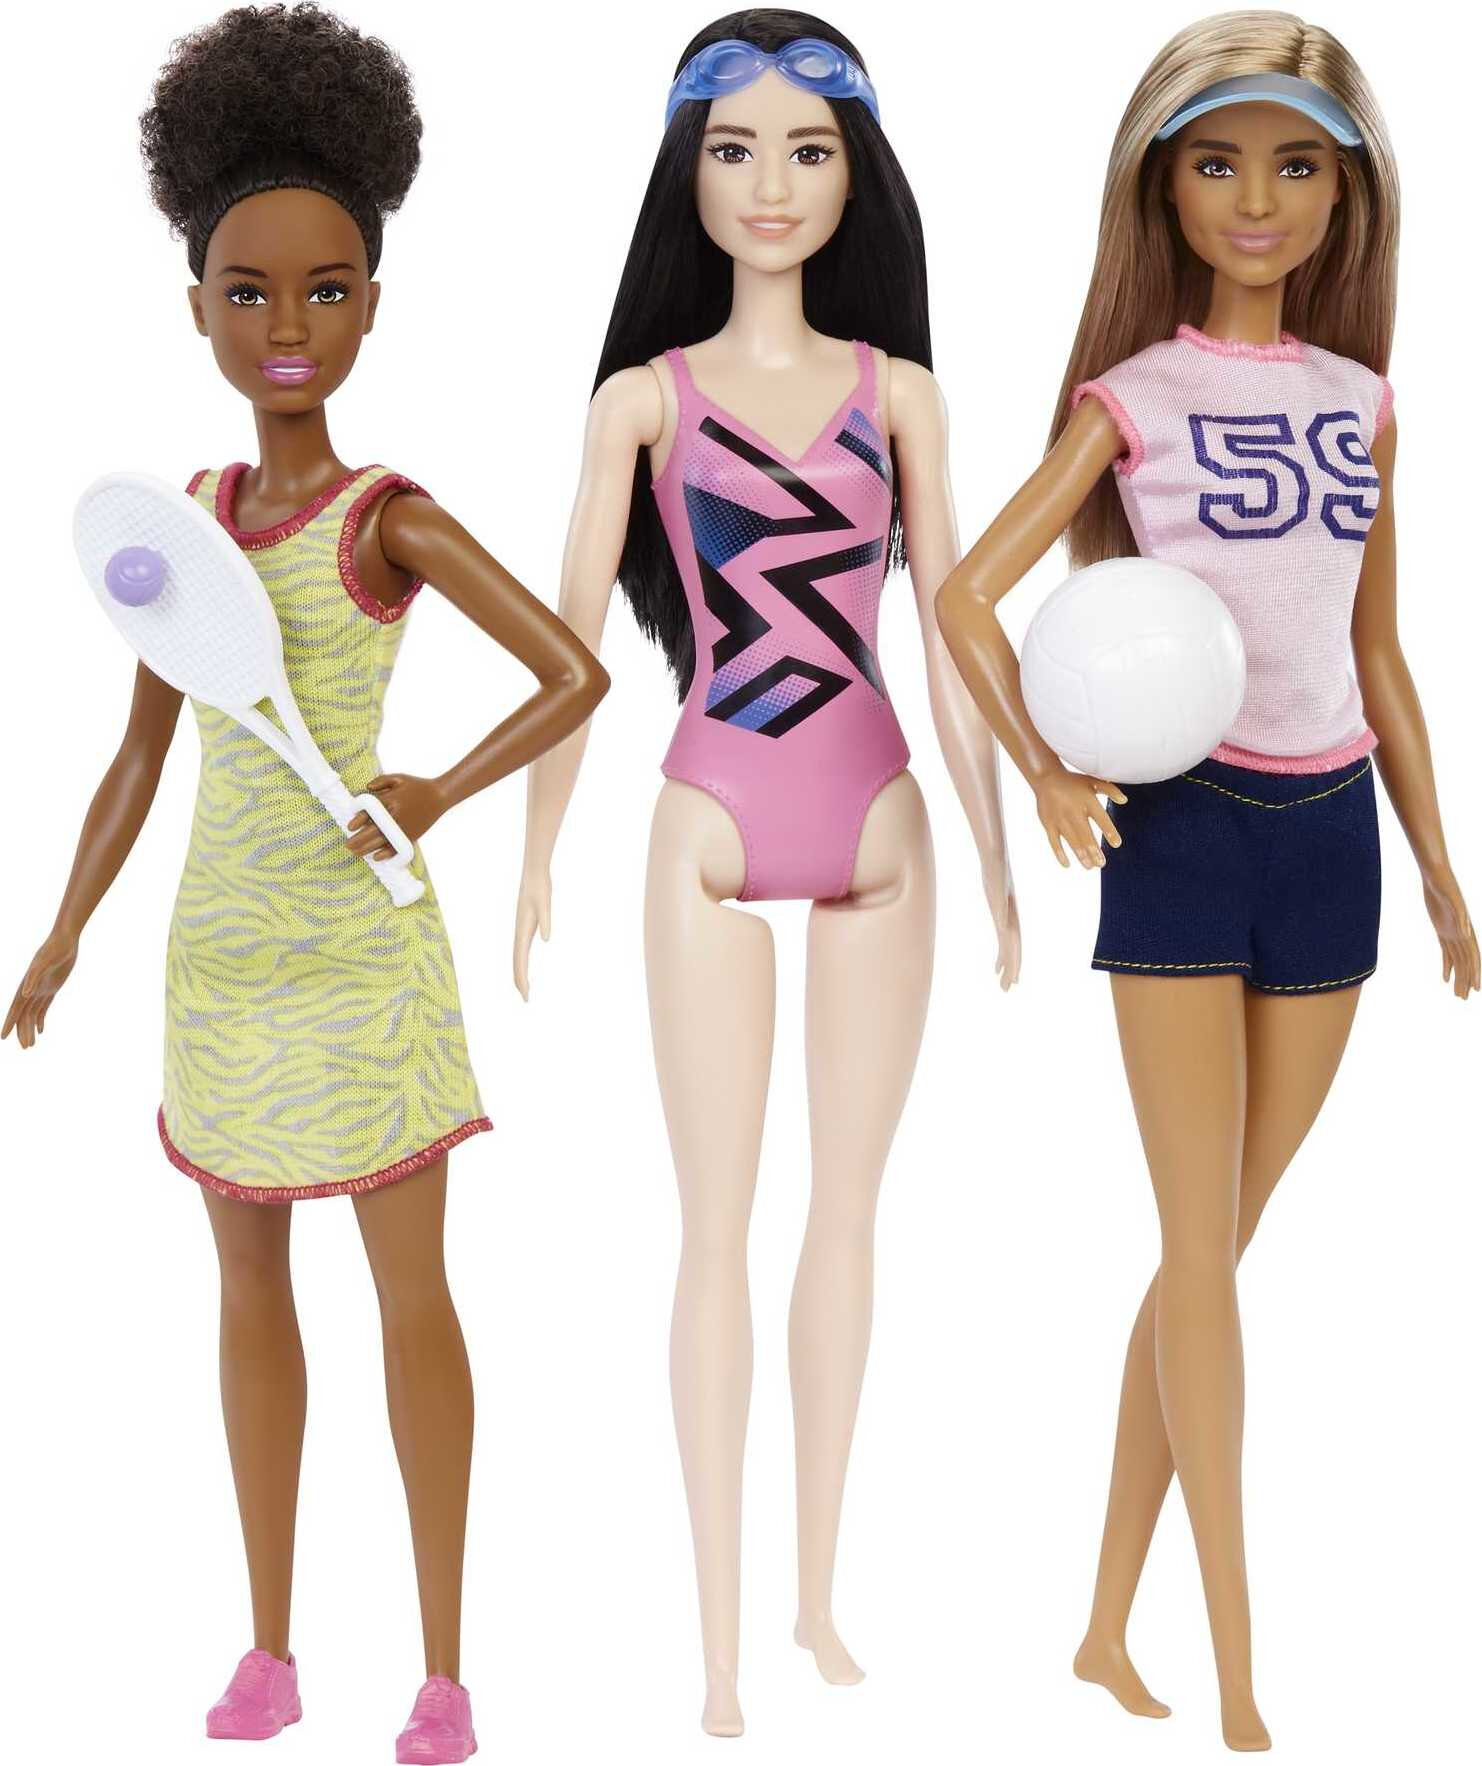 Barbie Doll Careers 6 Pack, Doll Collection Set with Related Career Outfits & Accessories - image 2 of 6